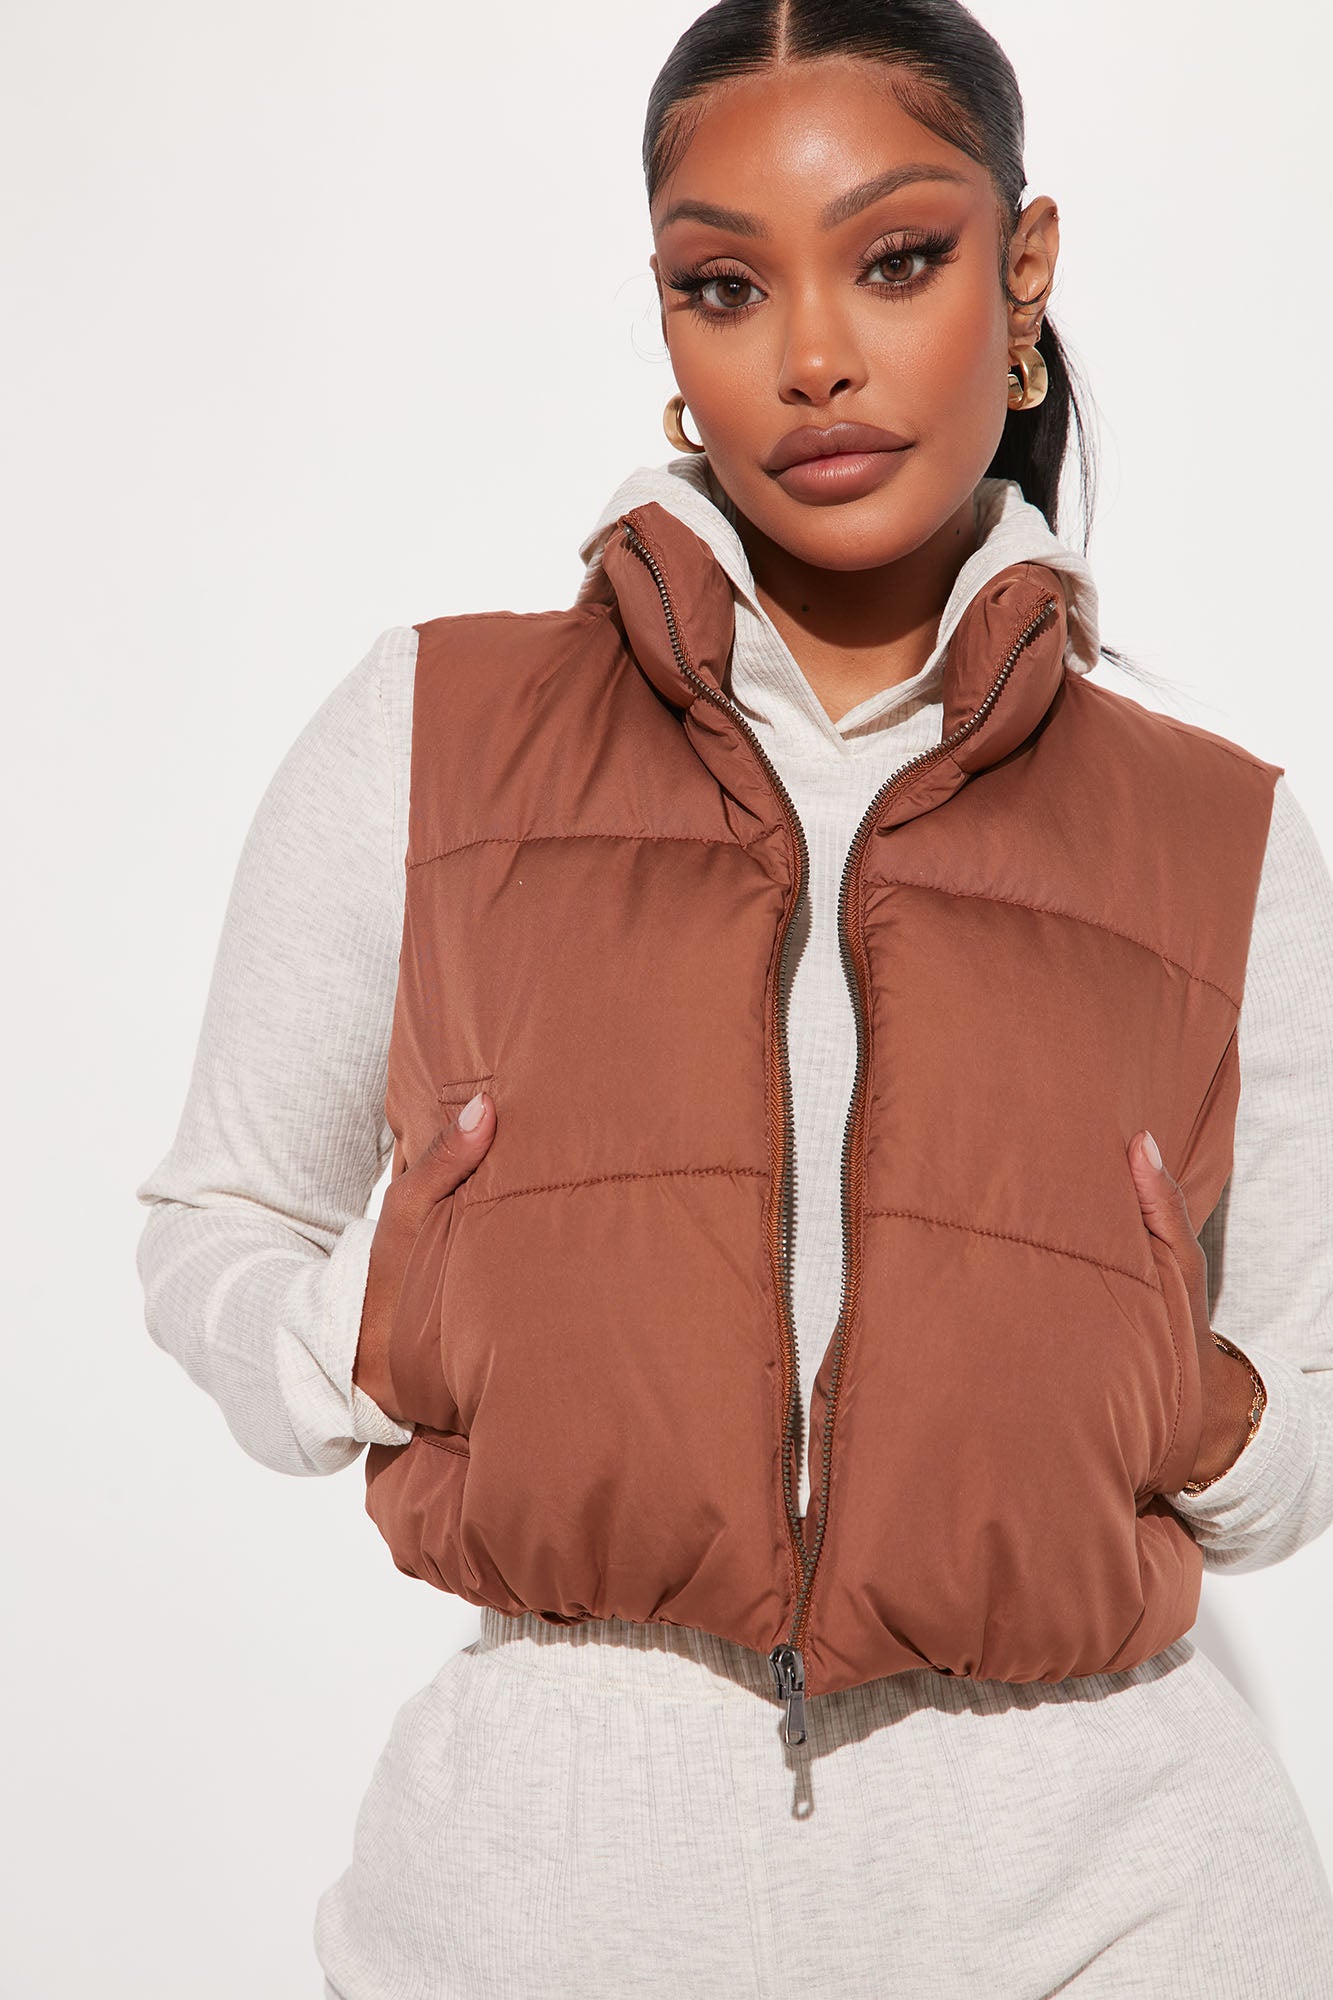 Women's Live More Puffer Vest in Brown Size XS by Fashion Nova